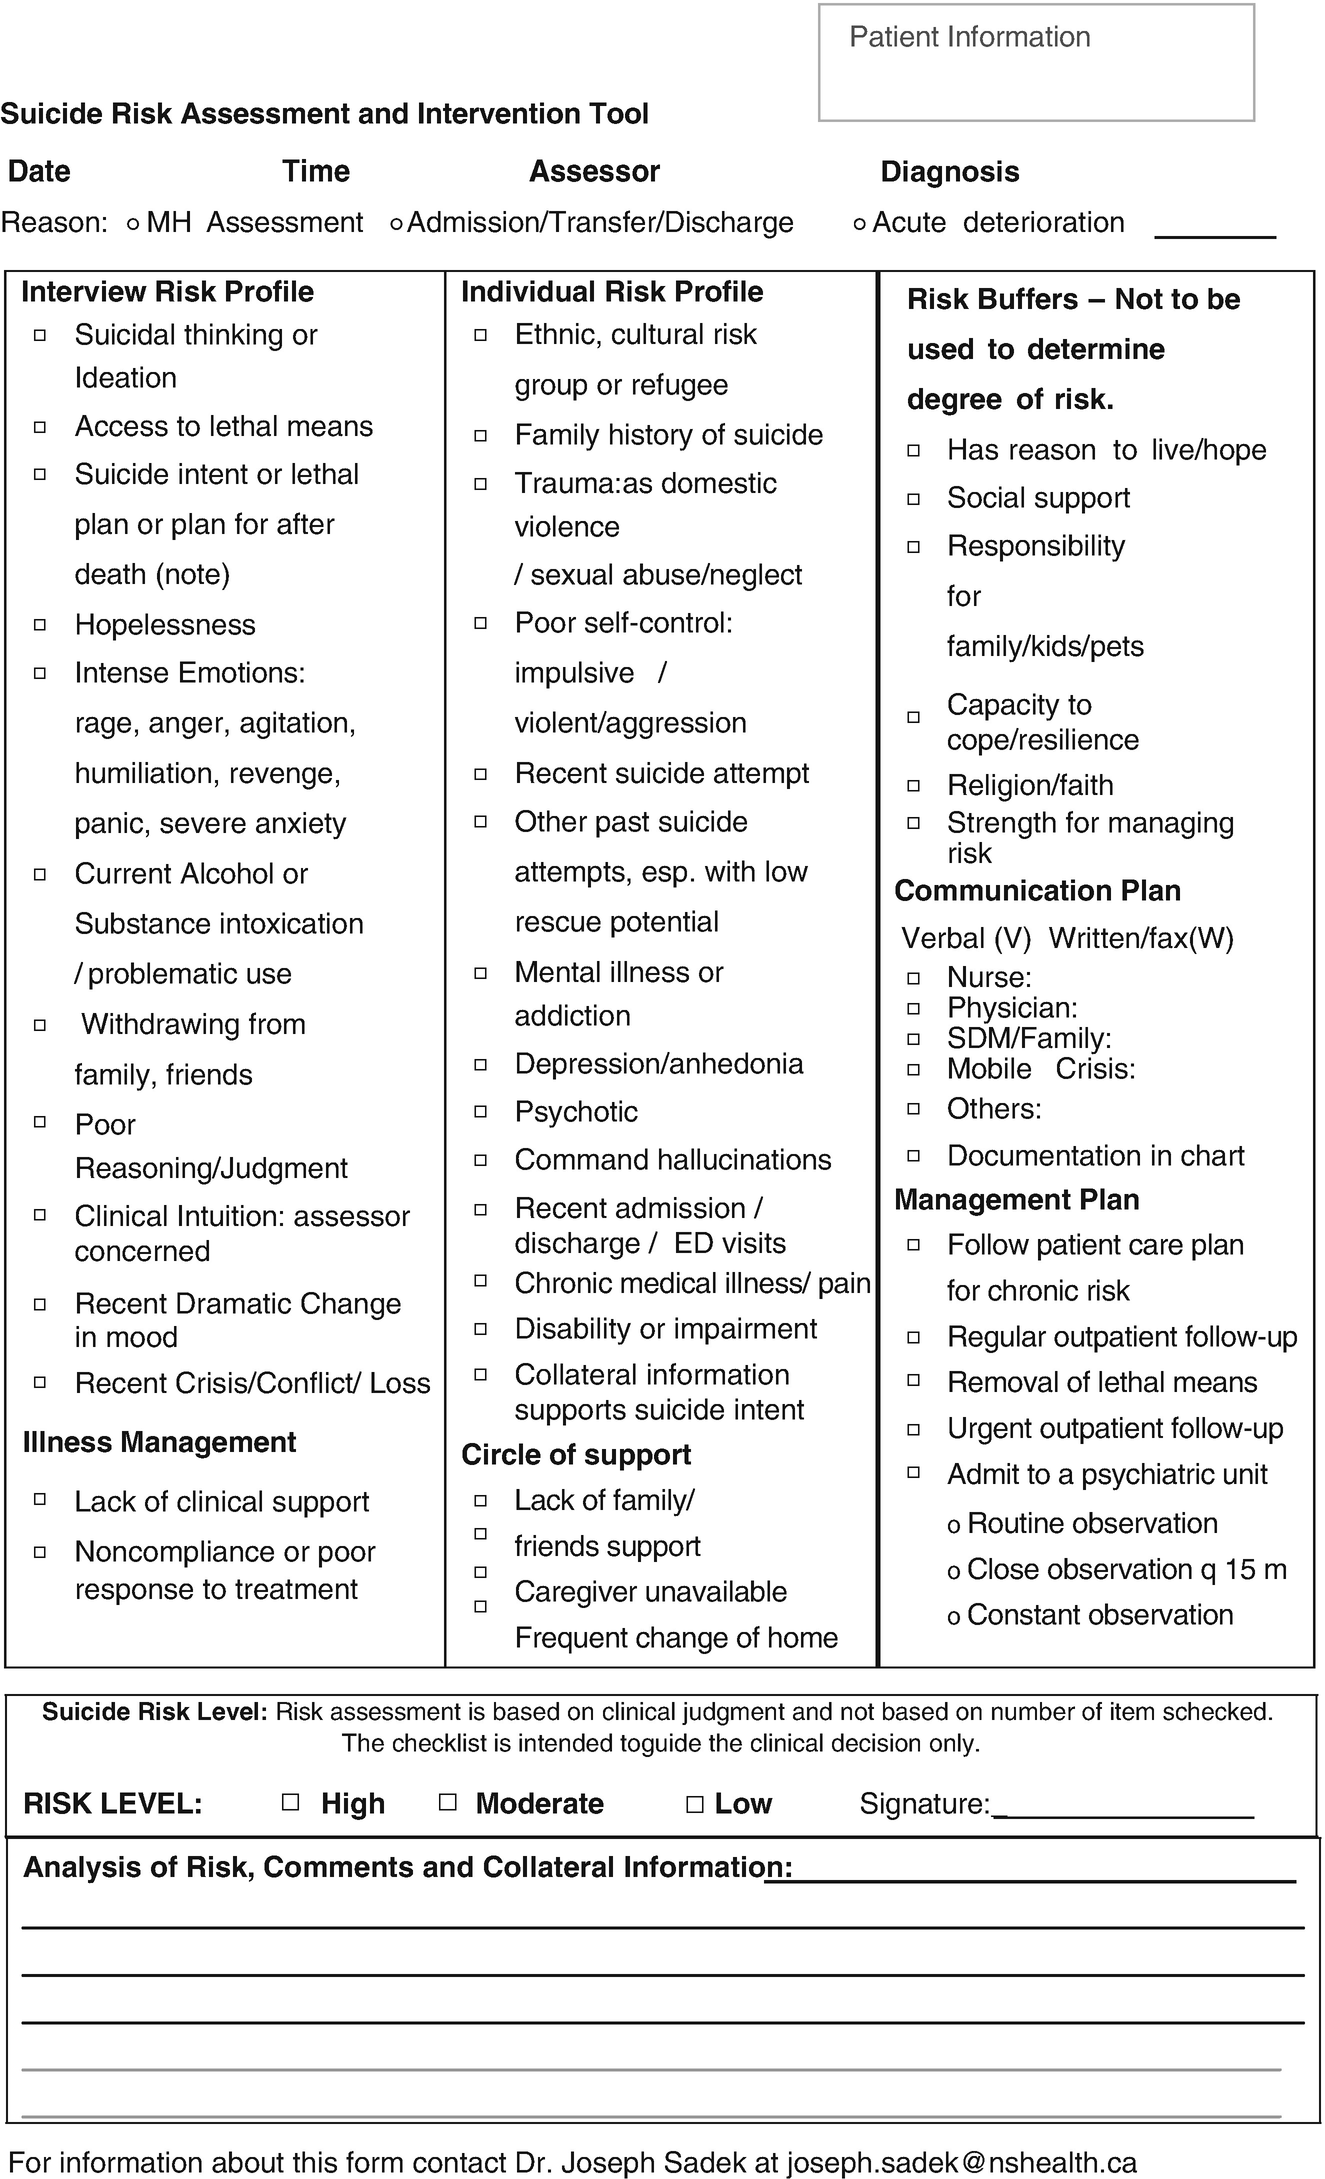 Screening And Assessment Tools Chart